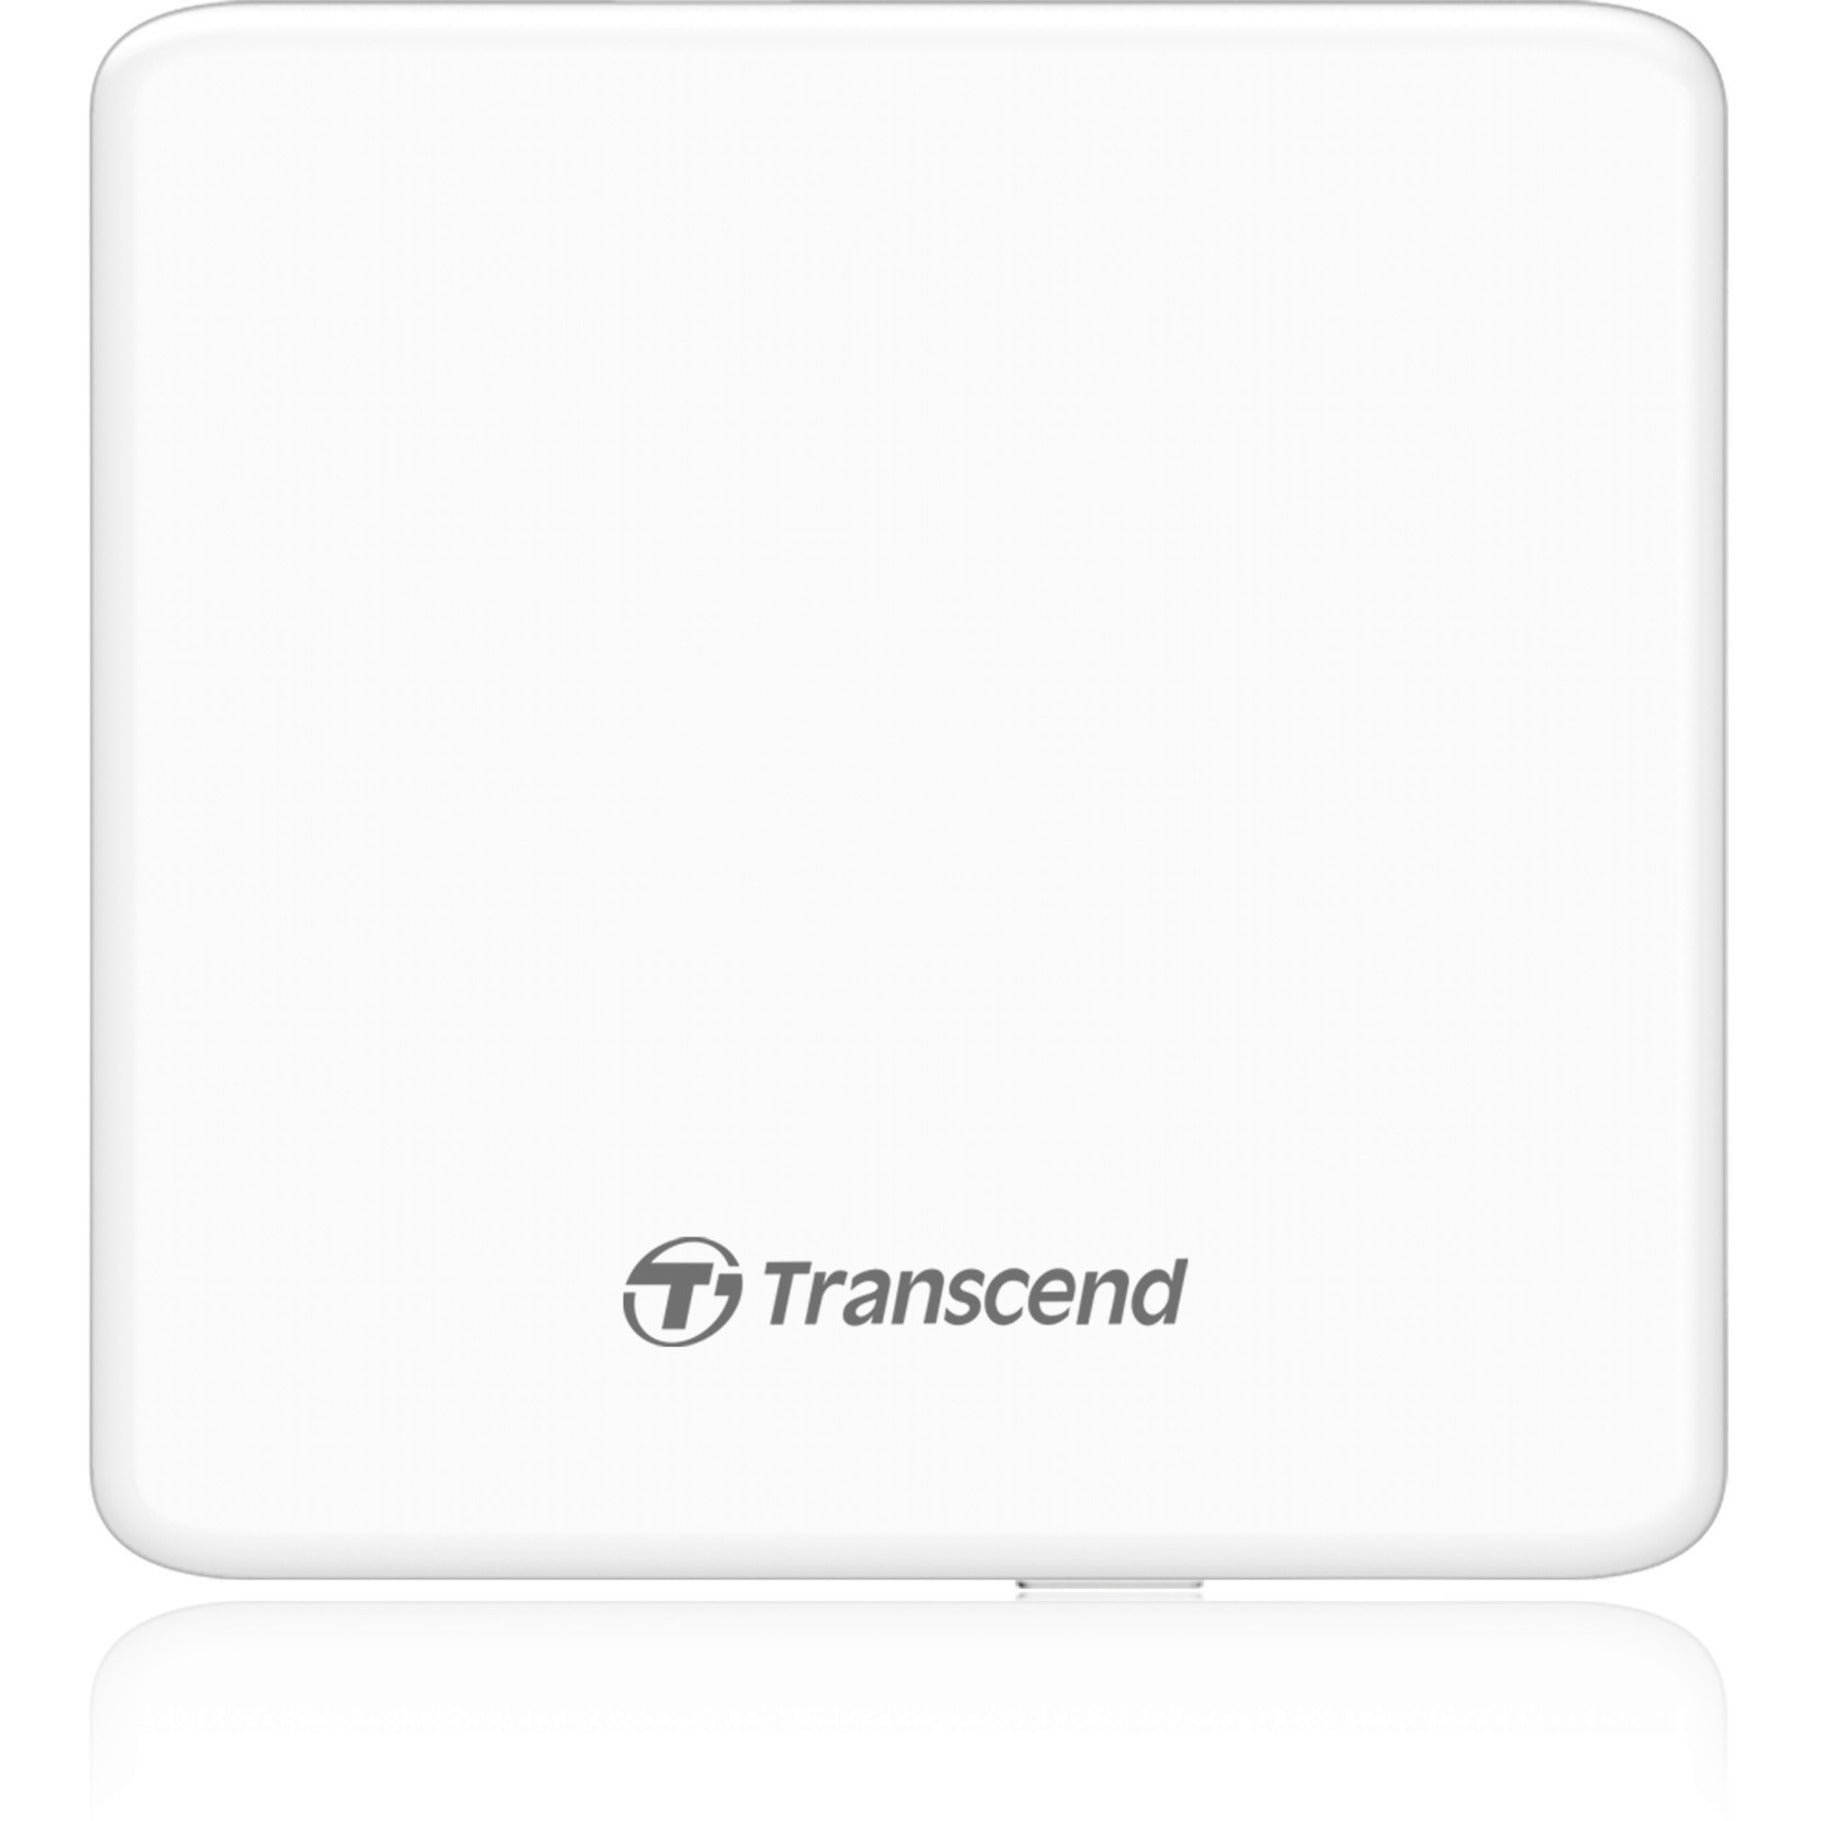 Transcend TS8XDVDS-W Extra Slim Portable DVD Writer, USB 2.0, 2 Year Limited Warranty